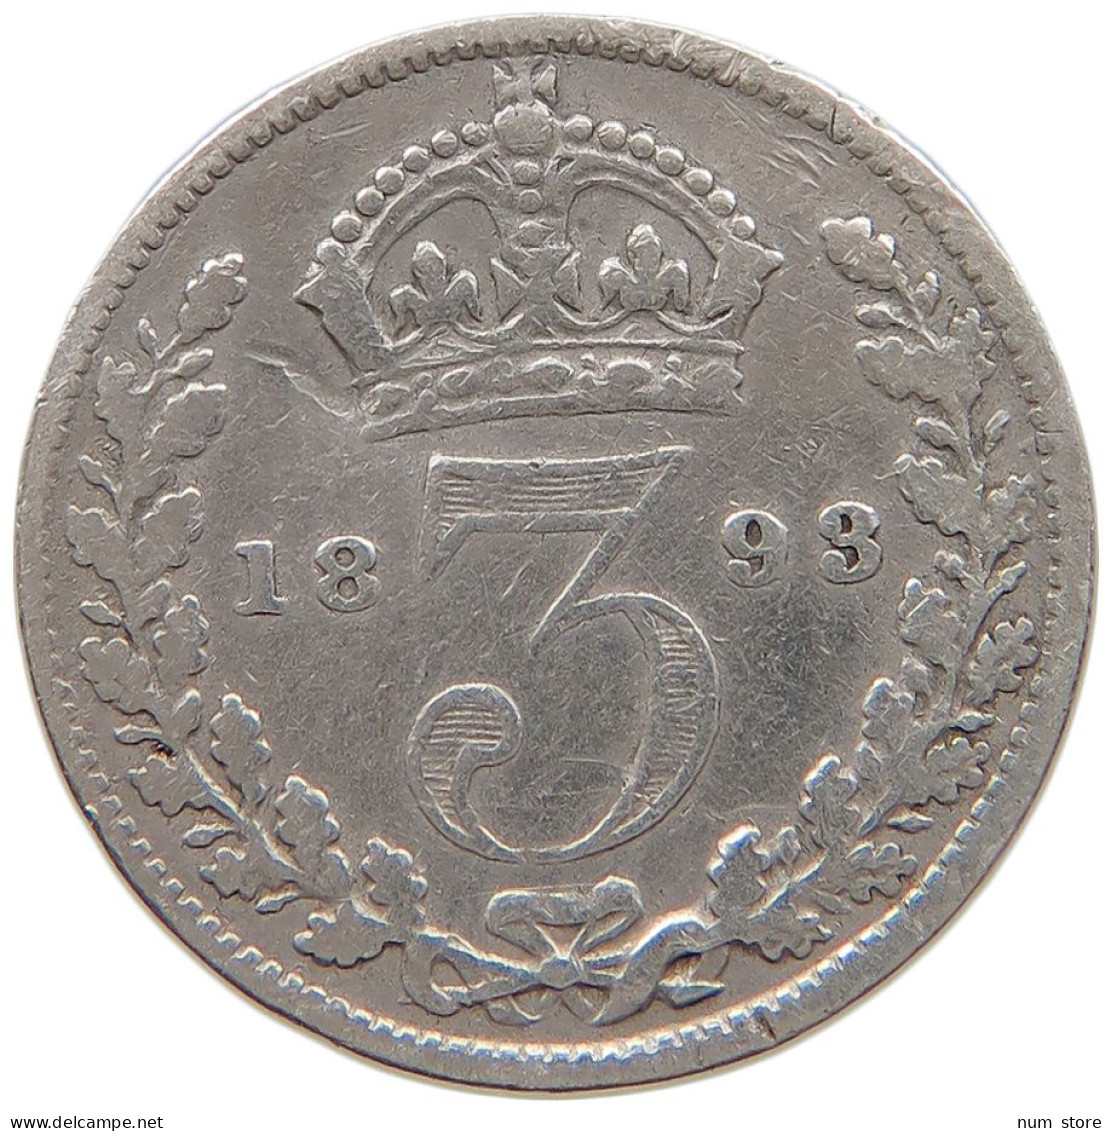 GREAT BRITAIN THREEPENCE 1893 Victoria 1837-1901 #a063 0617 - F. 3 Pence